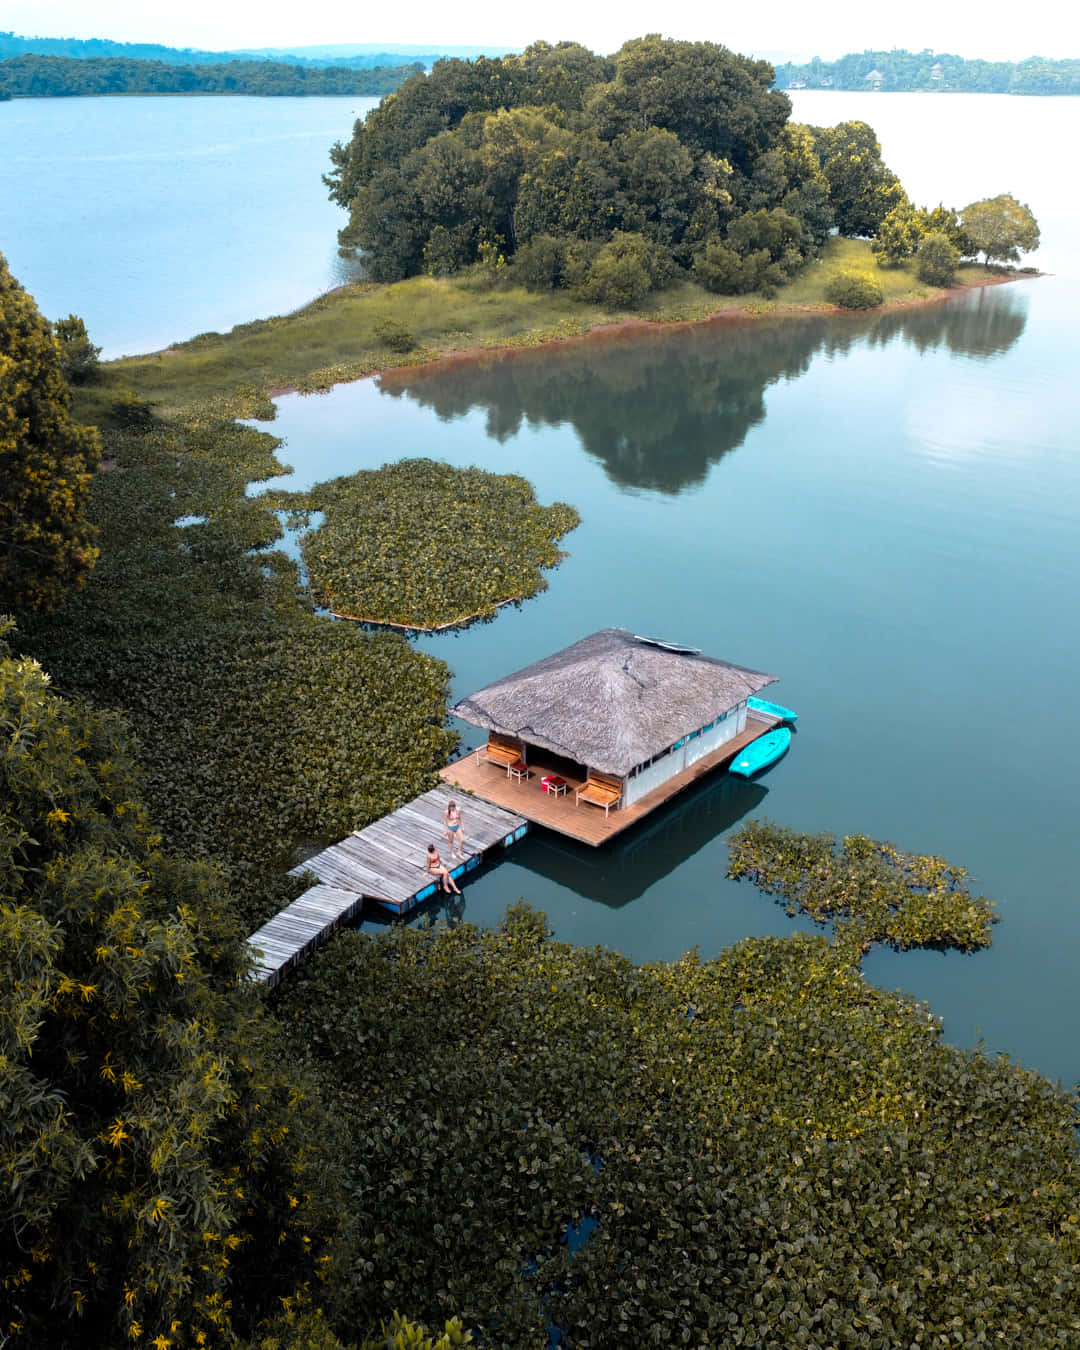 A House On A Dock In The Middle Of A Lake